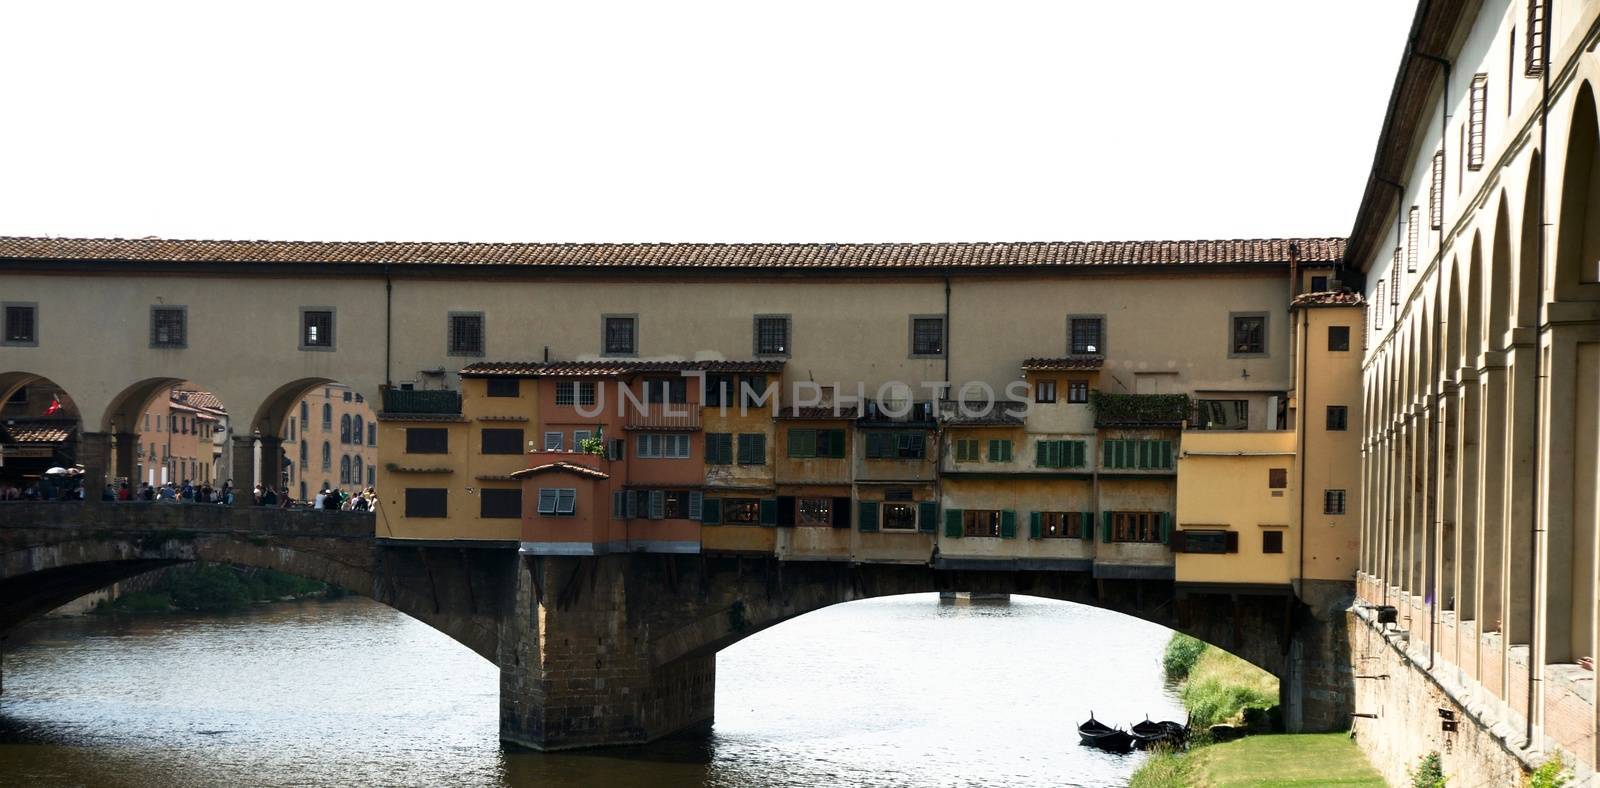 Florence streets and architecture at summer